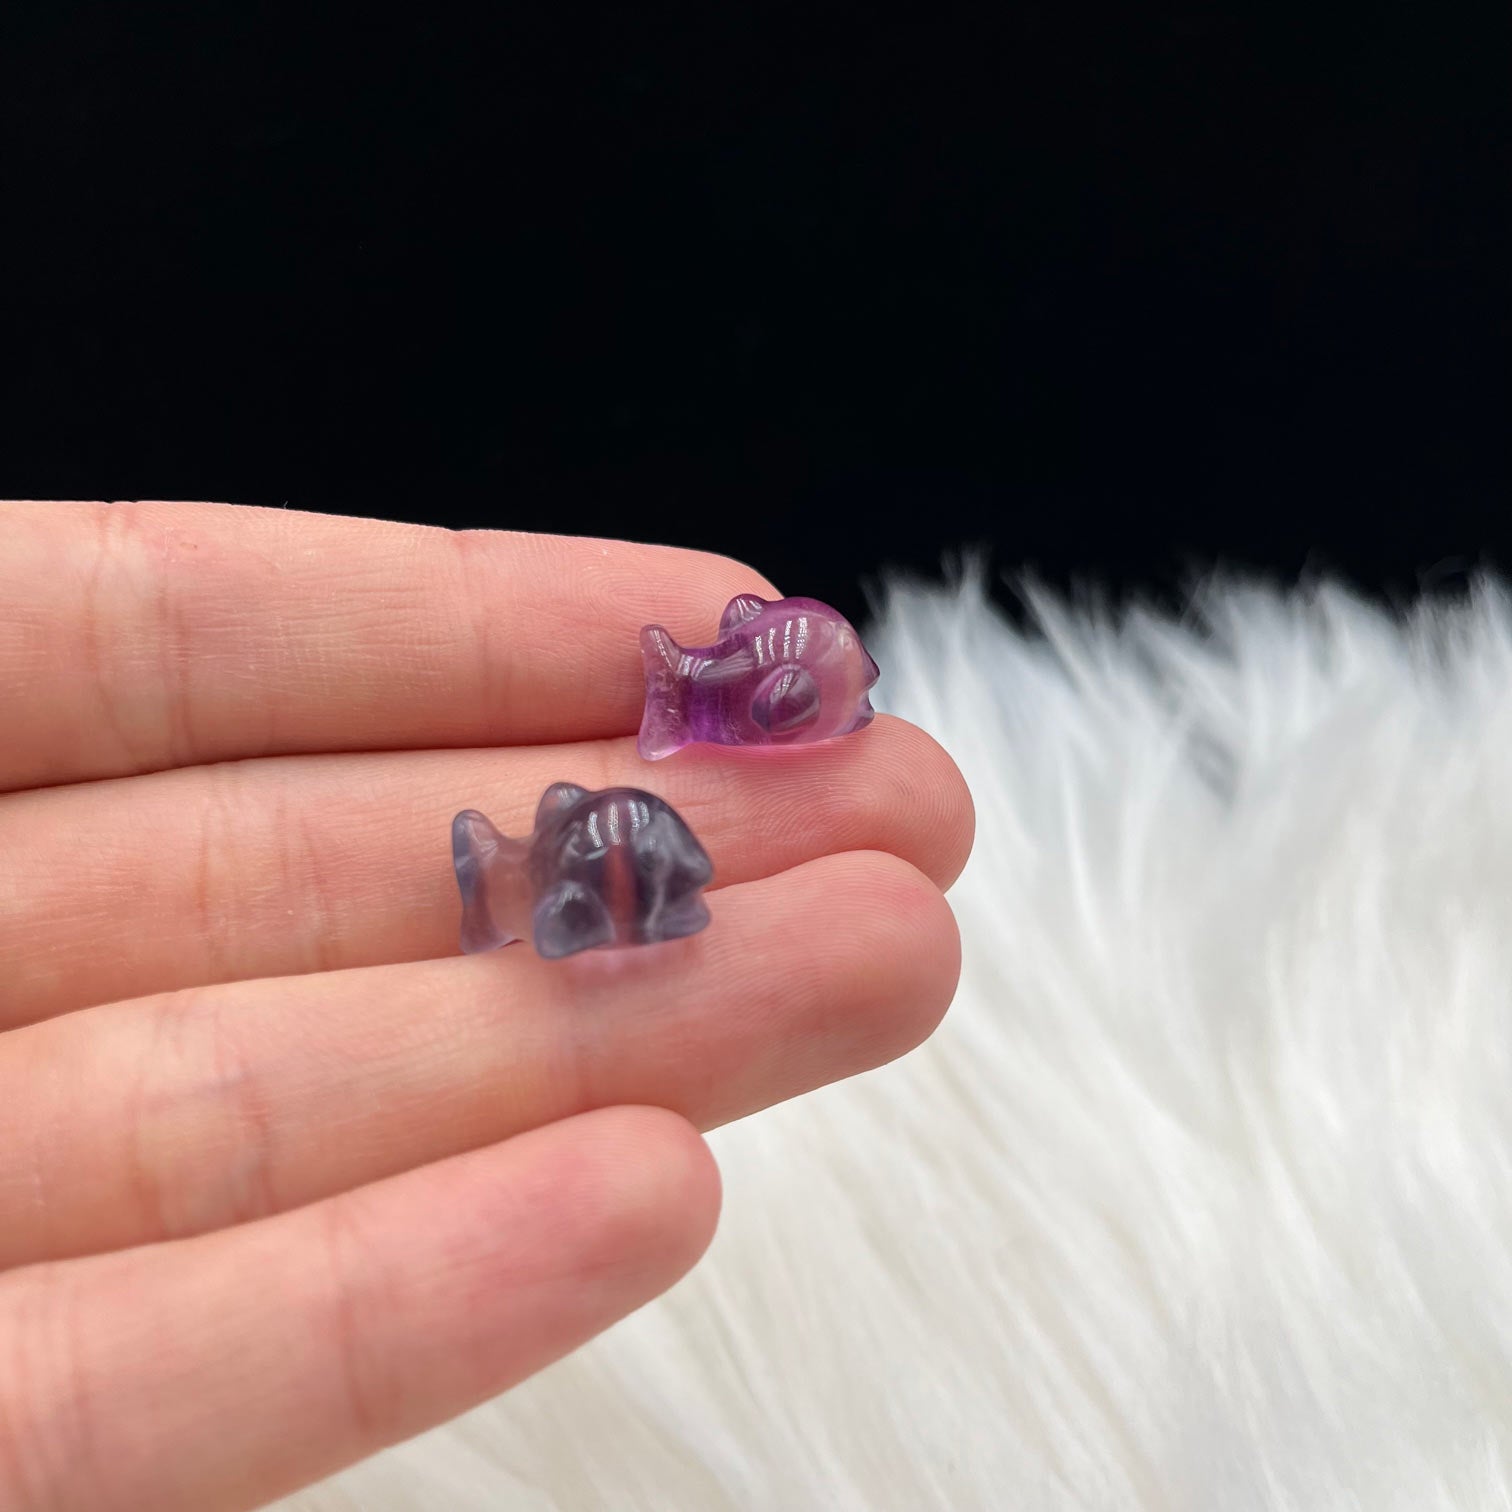 Mini Fluorite Crystal with Body Shark and Squirrel design, size 50